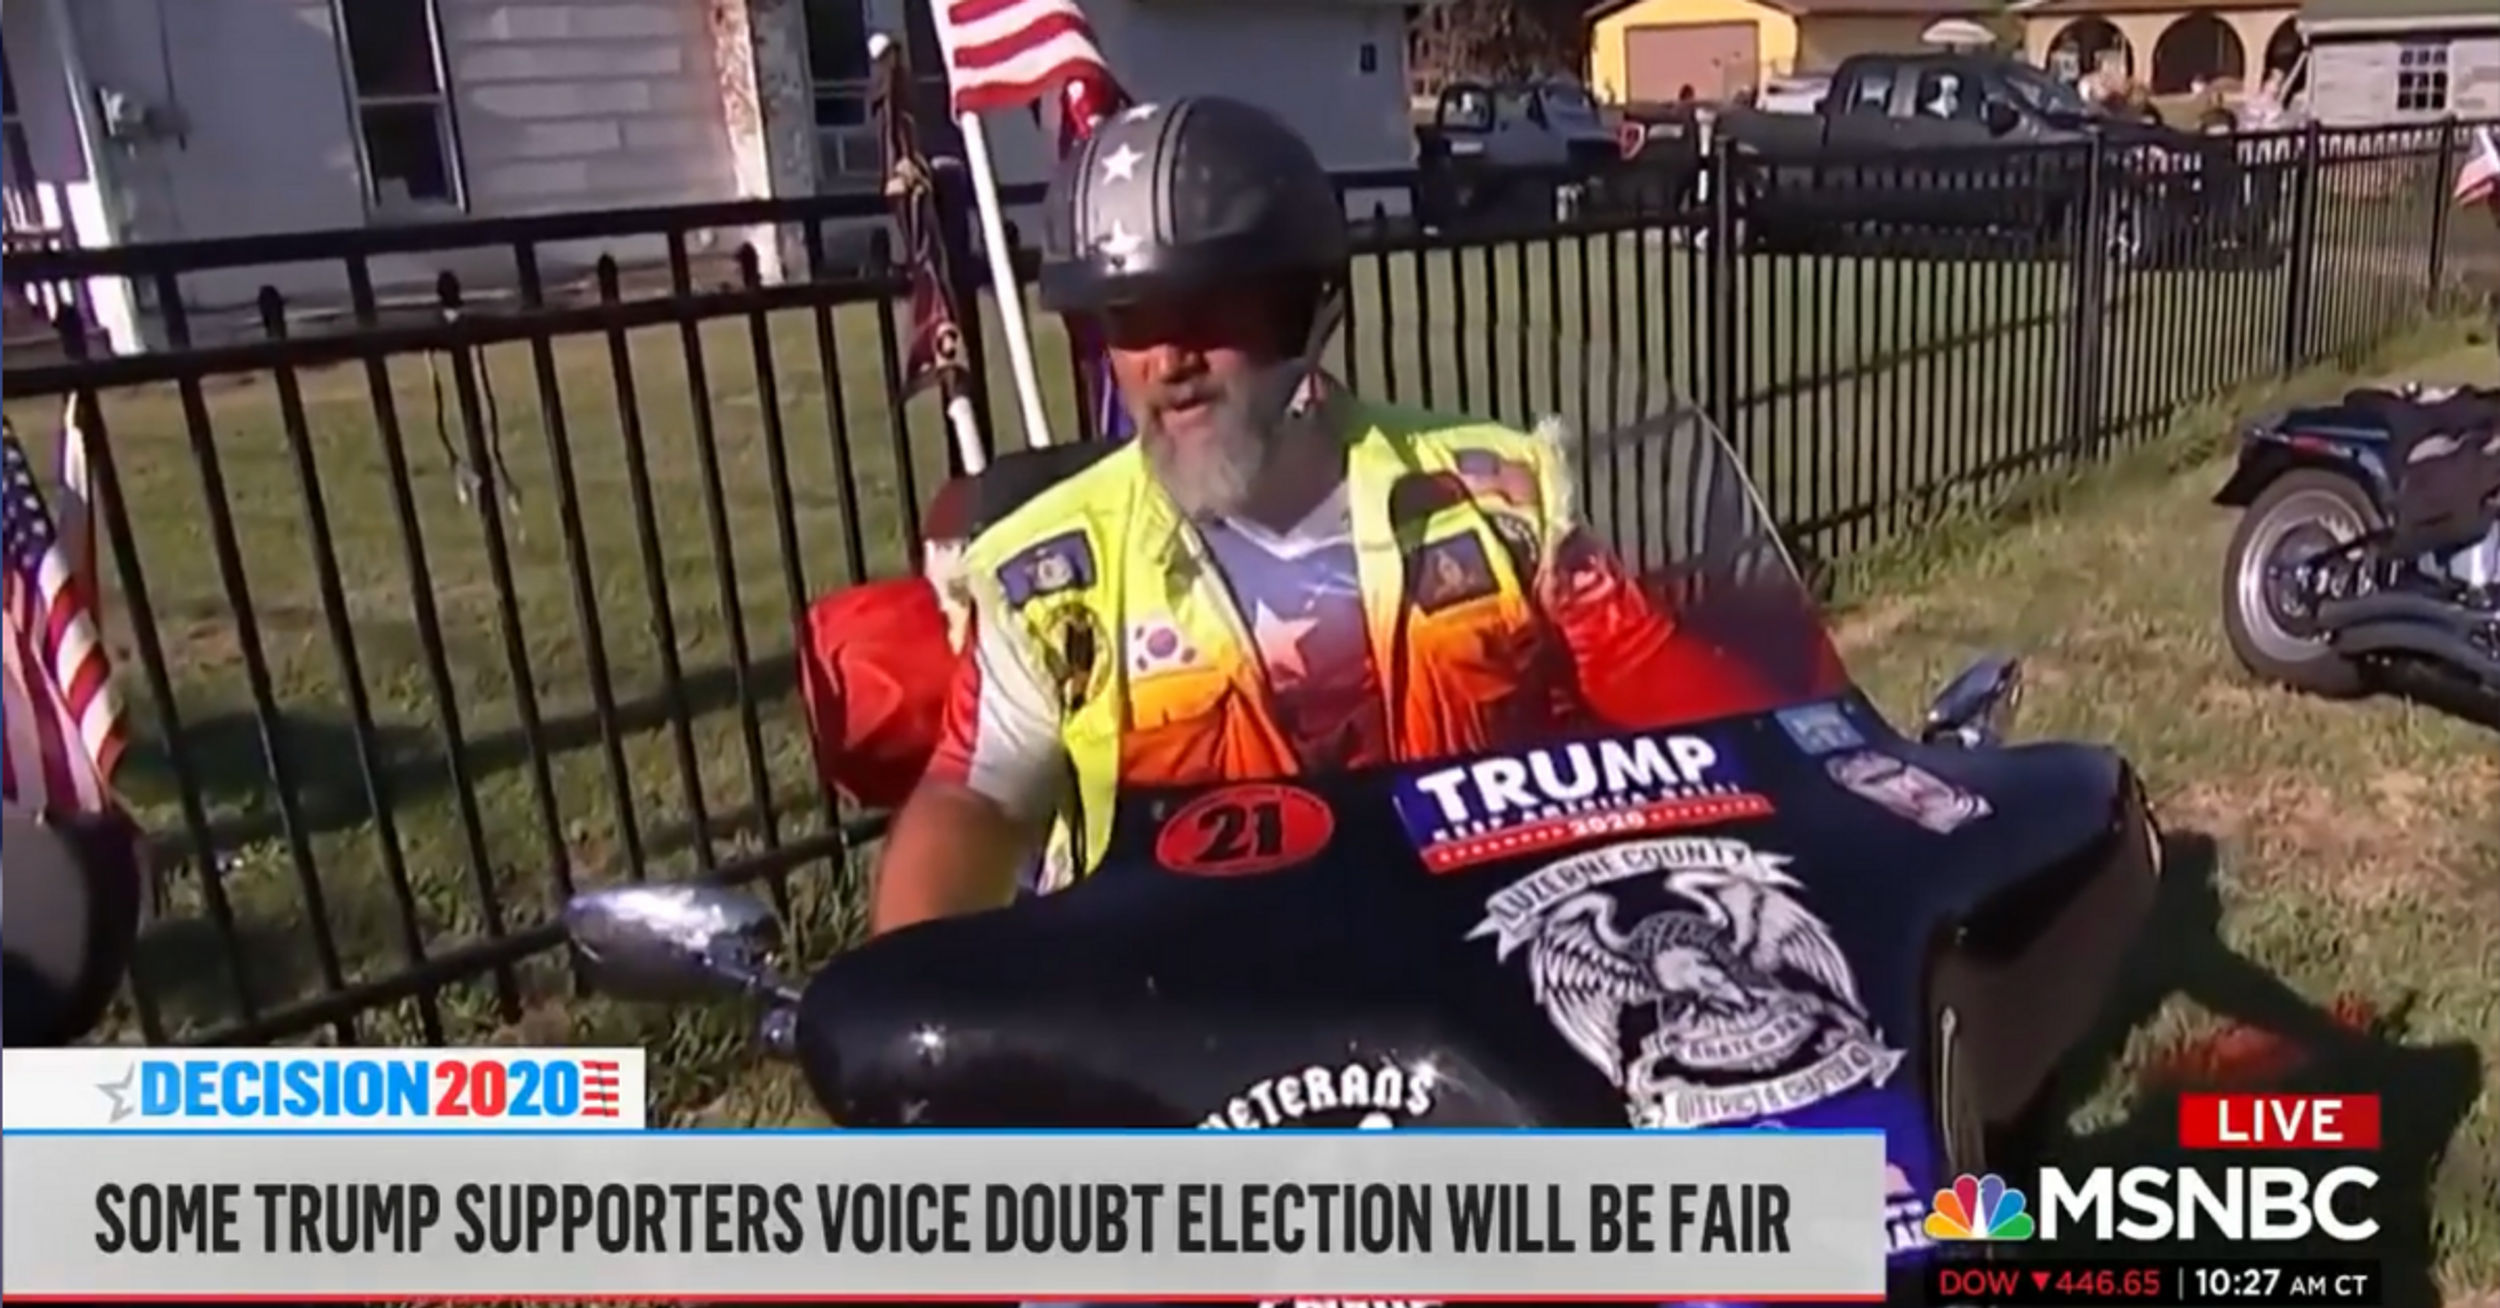 Trump Supporter Says He'll 'Take Up Arms' If Biden Wins Election In Unsettling MSNBC Interview